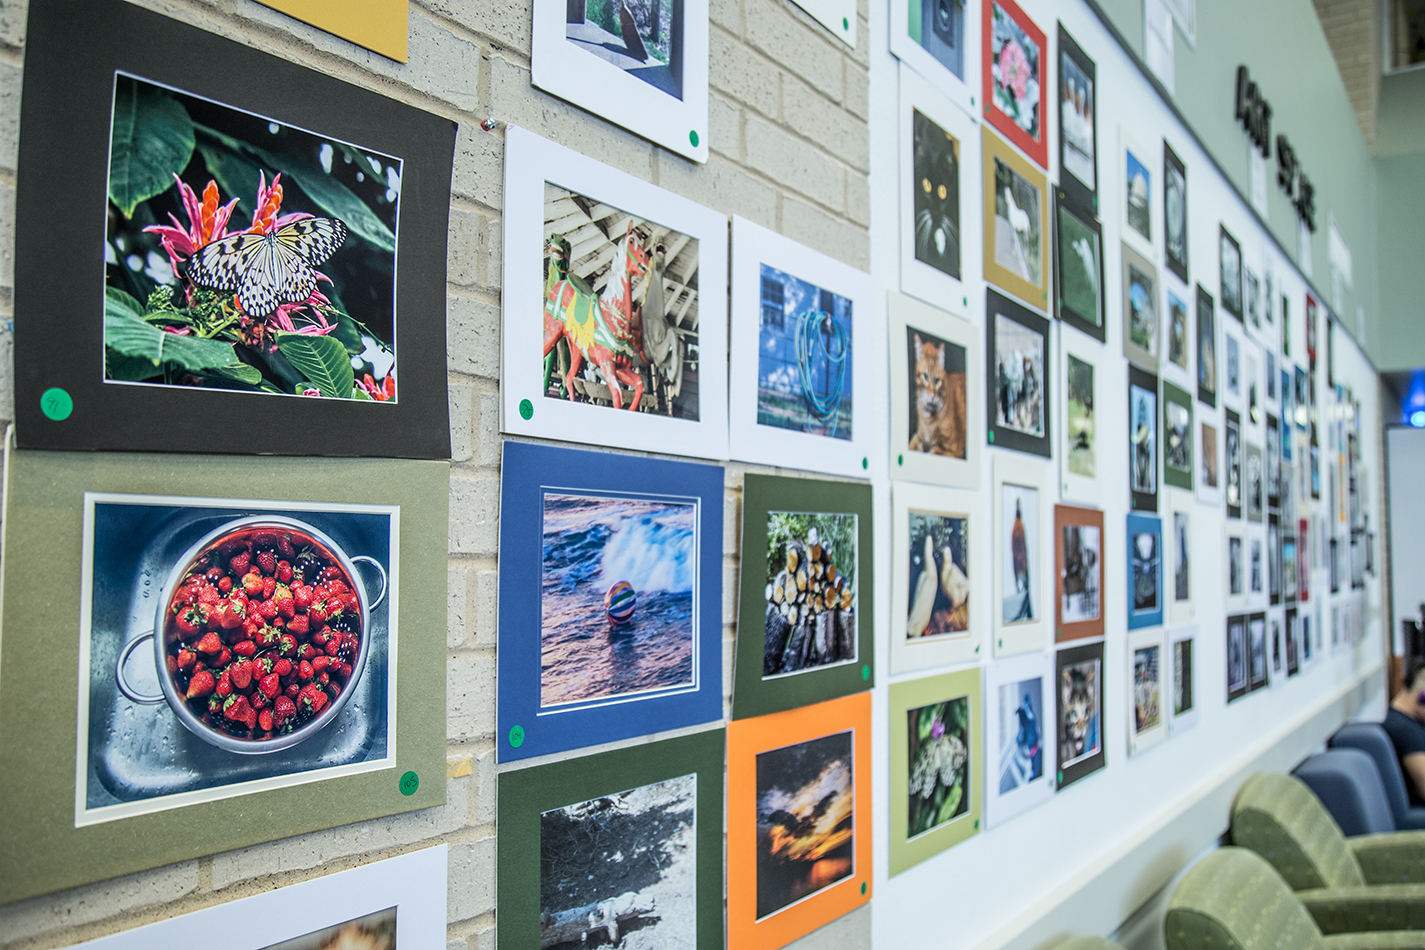 The student-submitted photos for the PICS photo contest hang in the art space of the Walsh Library on NW Campus. The winners were announced April 30, and the winning photos will remain hanging in the library until the end of the semester.